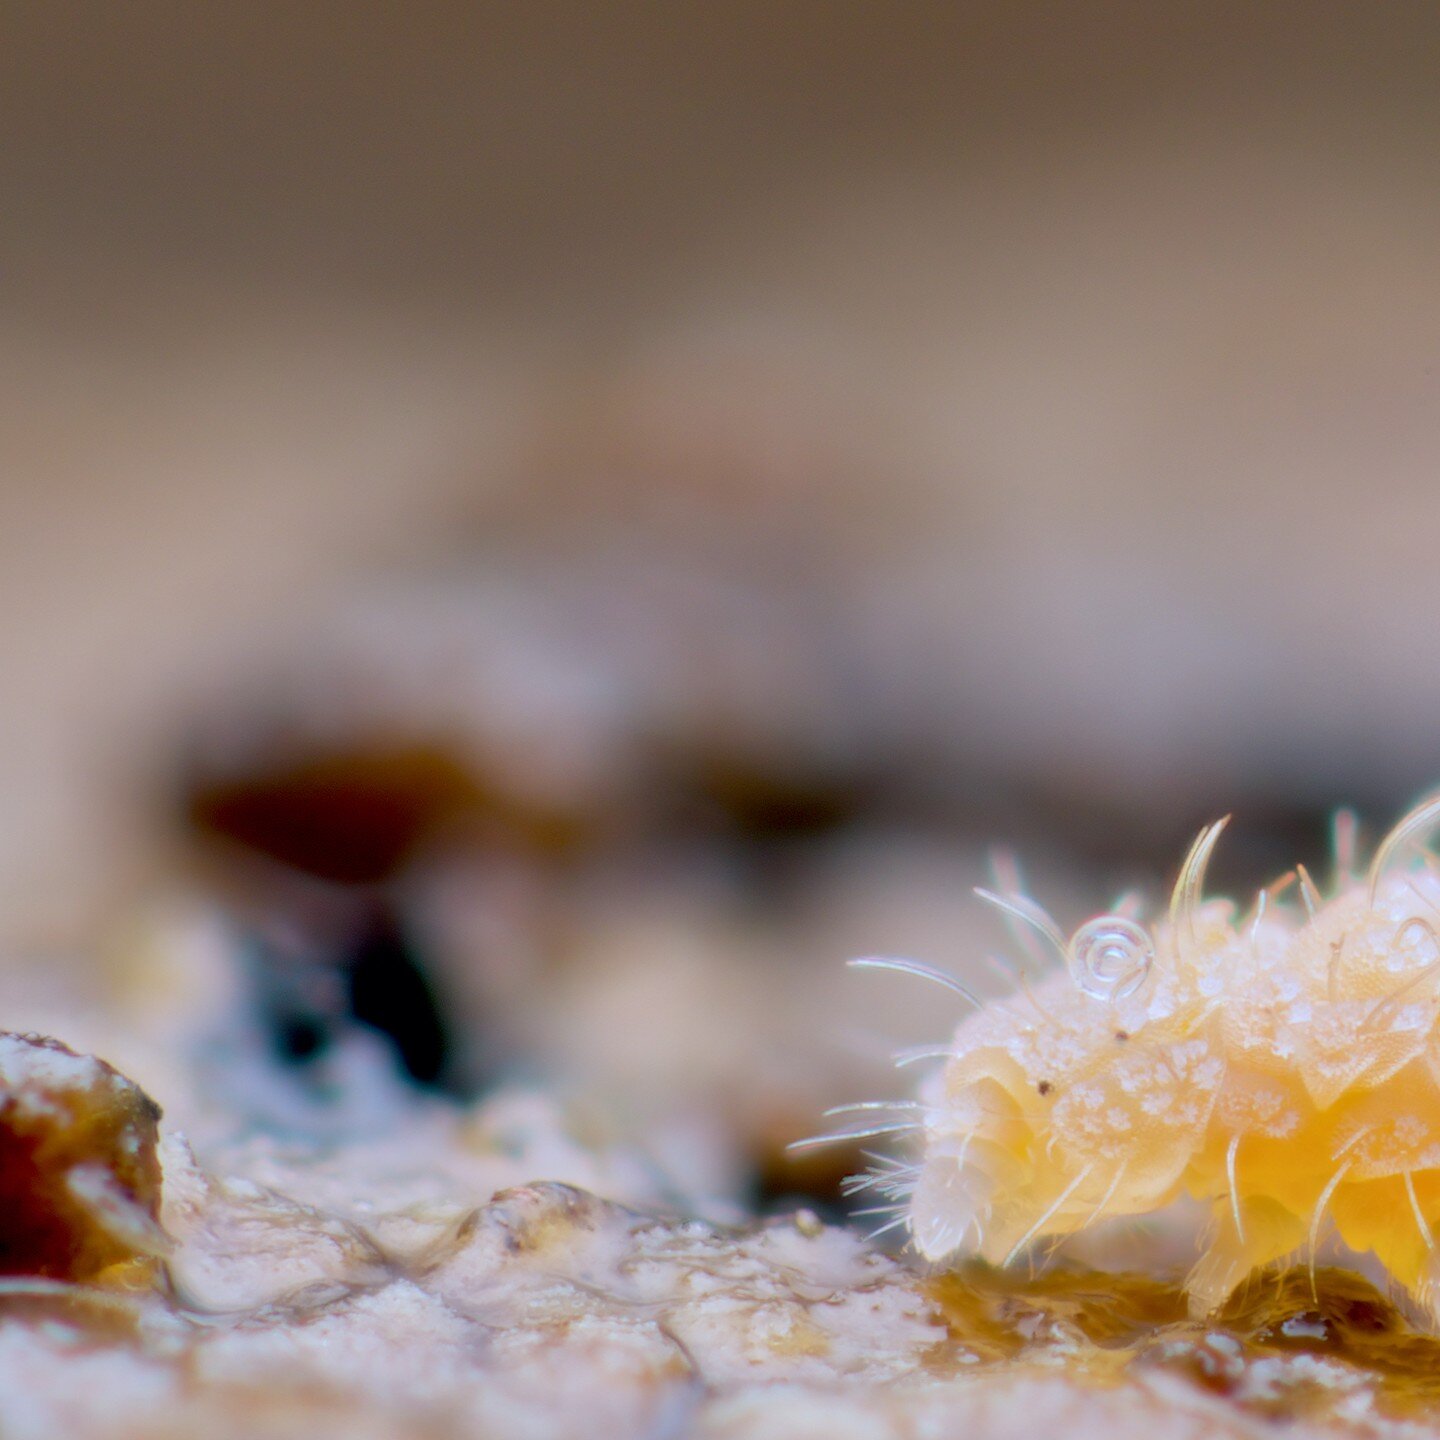 This is Monobella grassei, a very common UK springtail. It has the most beautiful flaps and ornamentation across its body as well as the obvious long, curving setae. Subtle but delightful and around 2mm long. 
And there's also a nematode in the photo